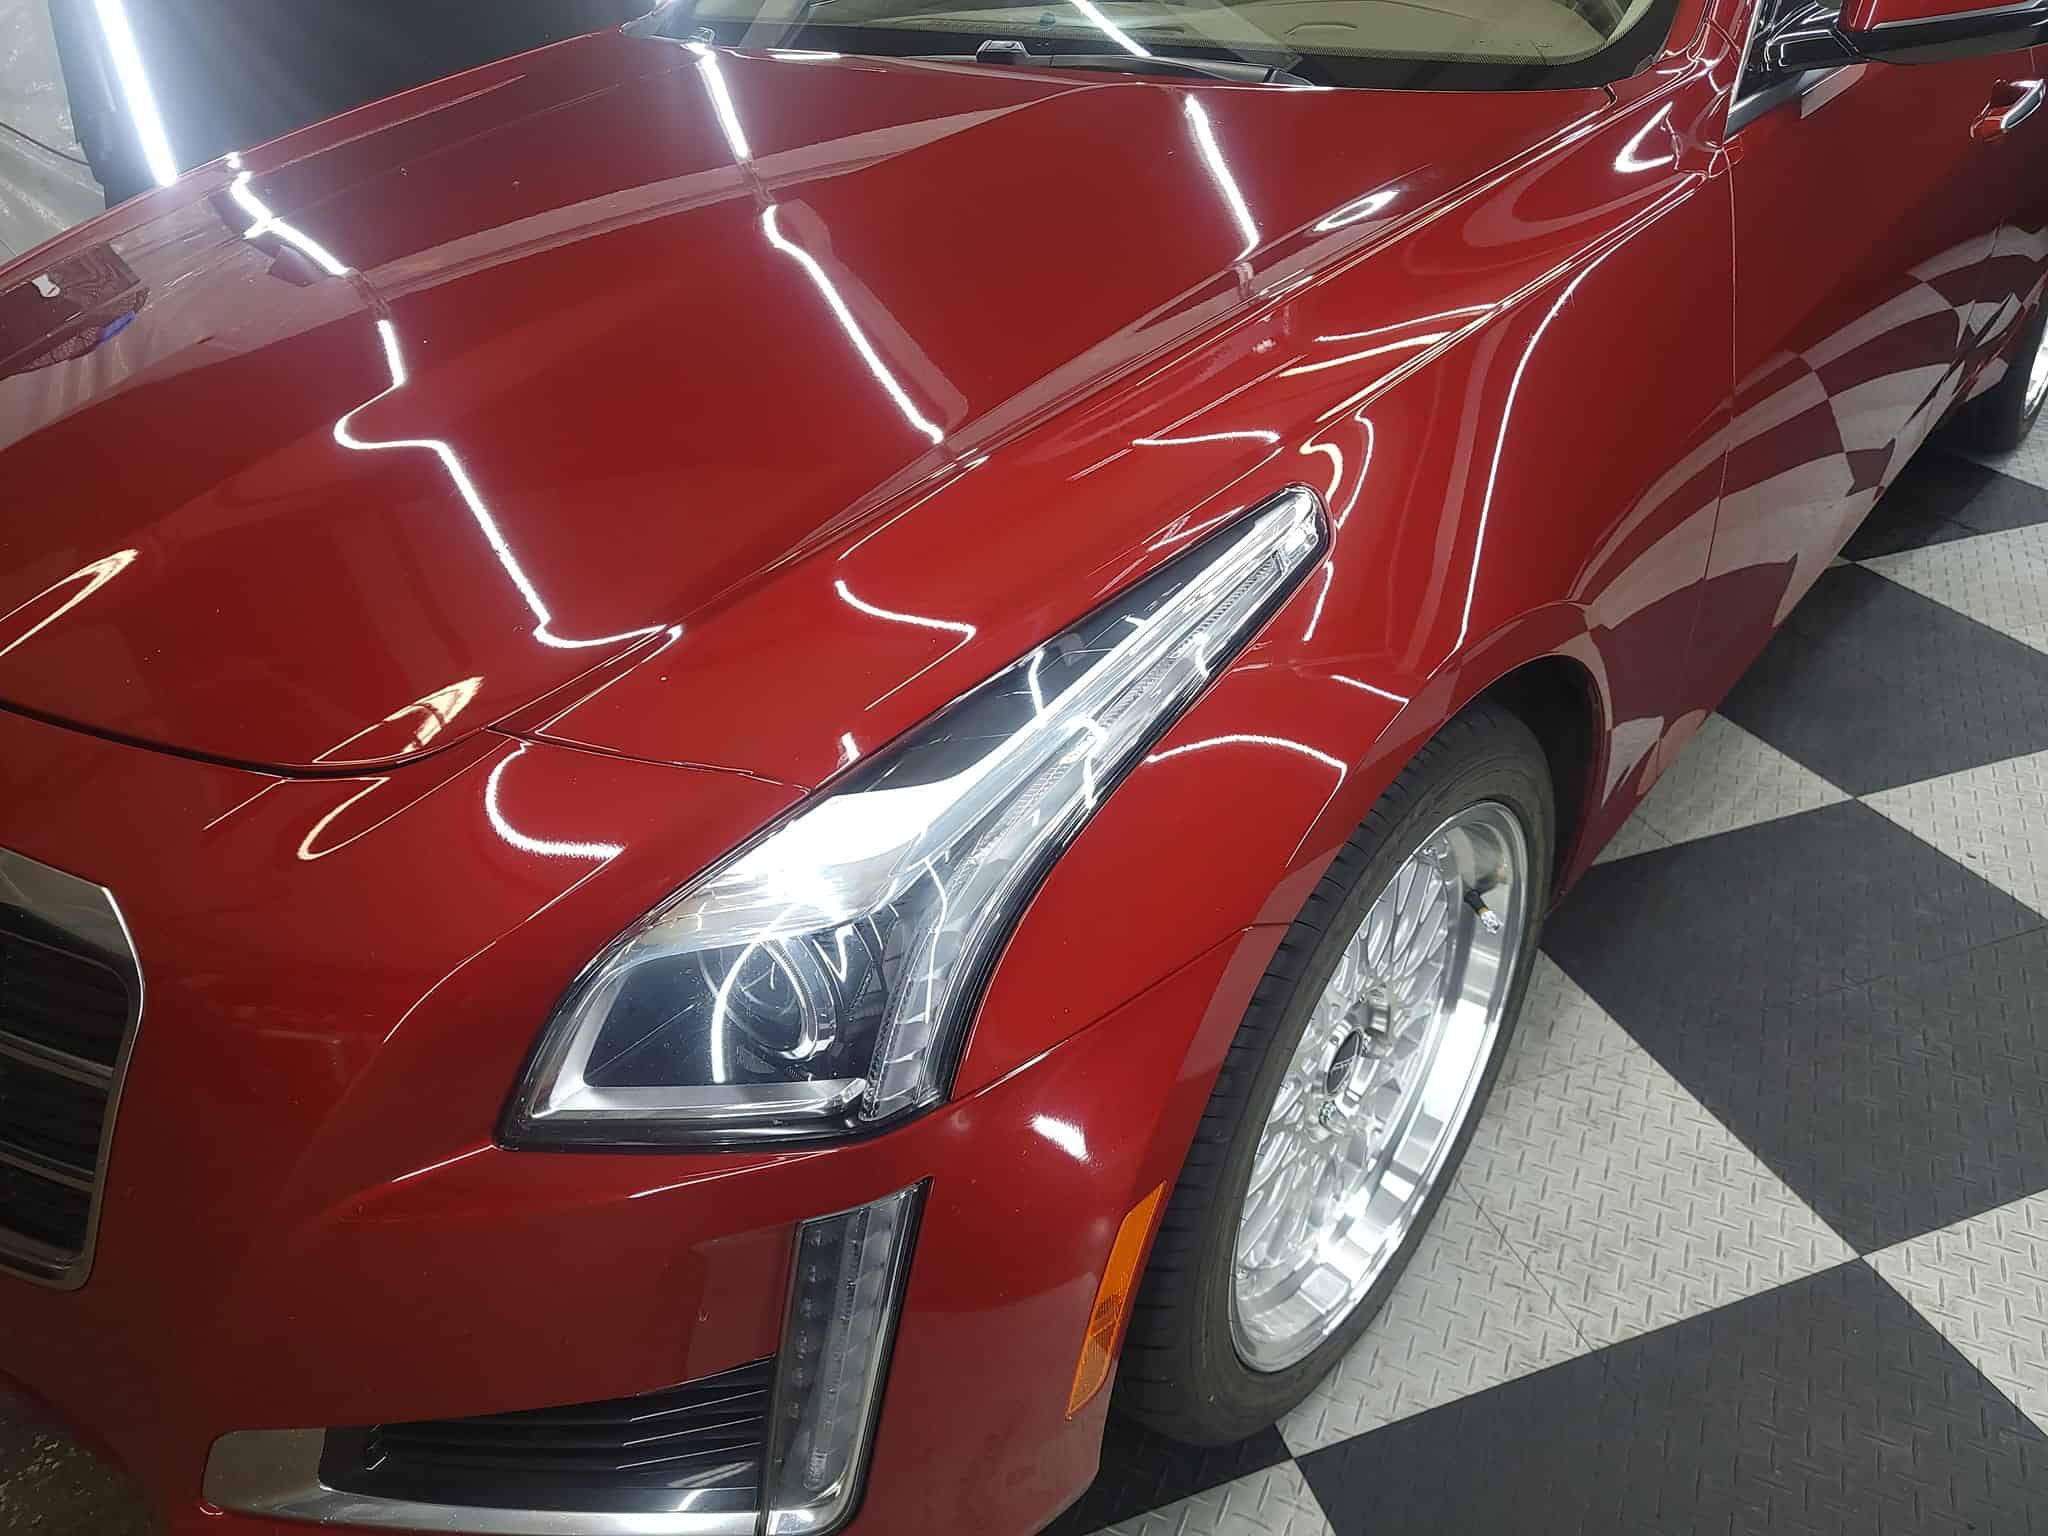 a red cadillac is parked in a showroom.